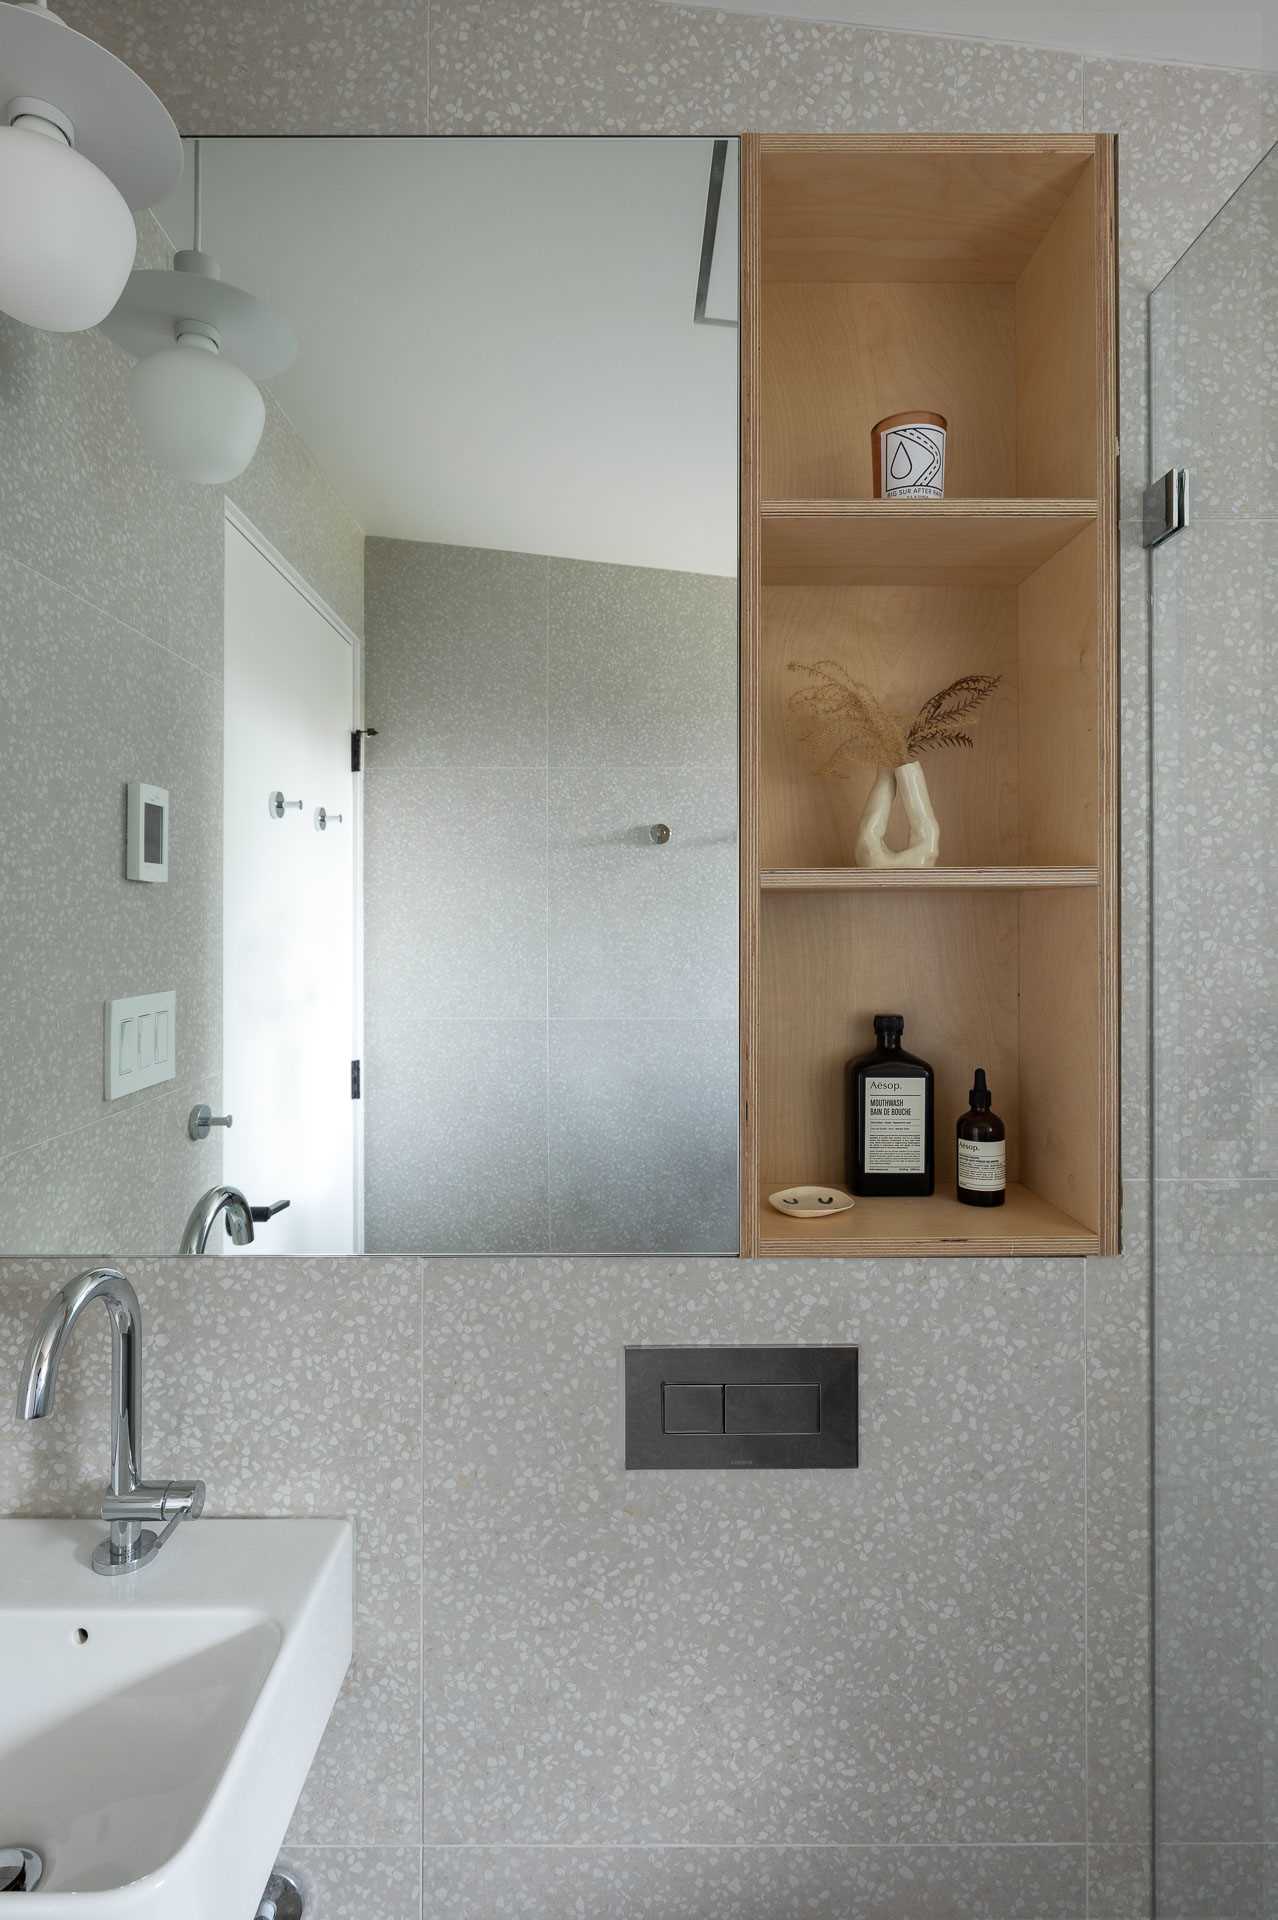 A remodeled bathroom with terrazzo wall tiles and plywood shelving.